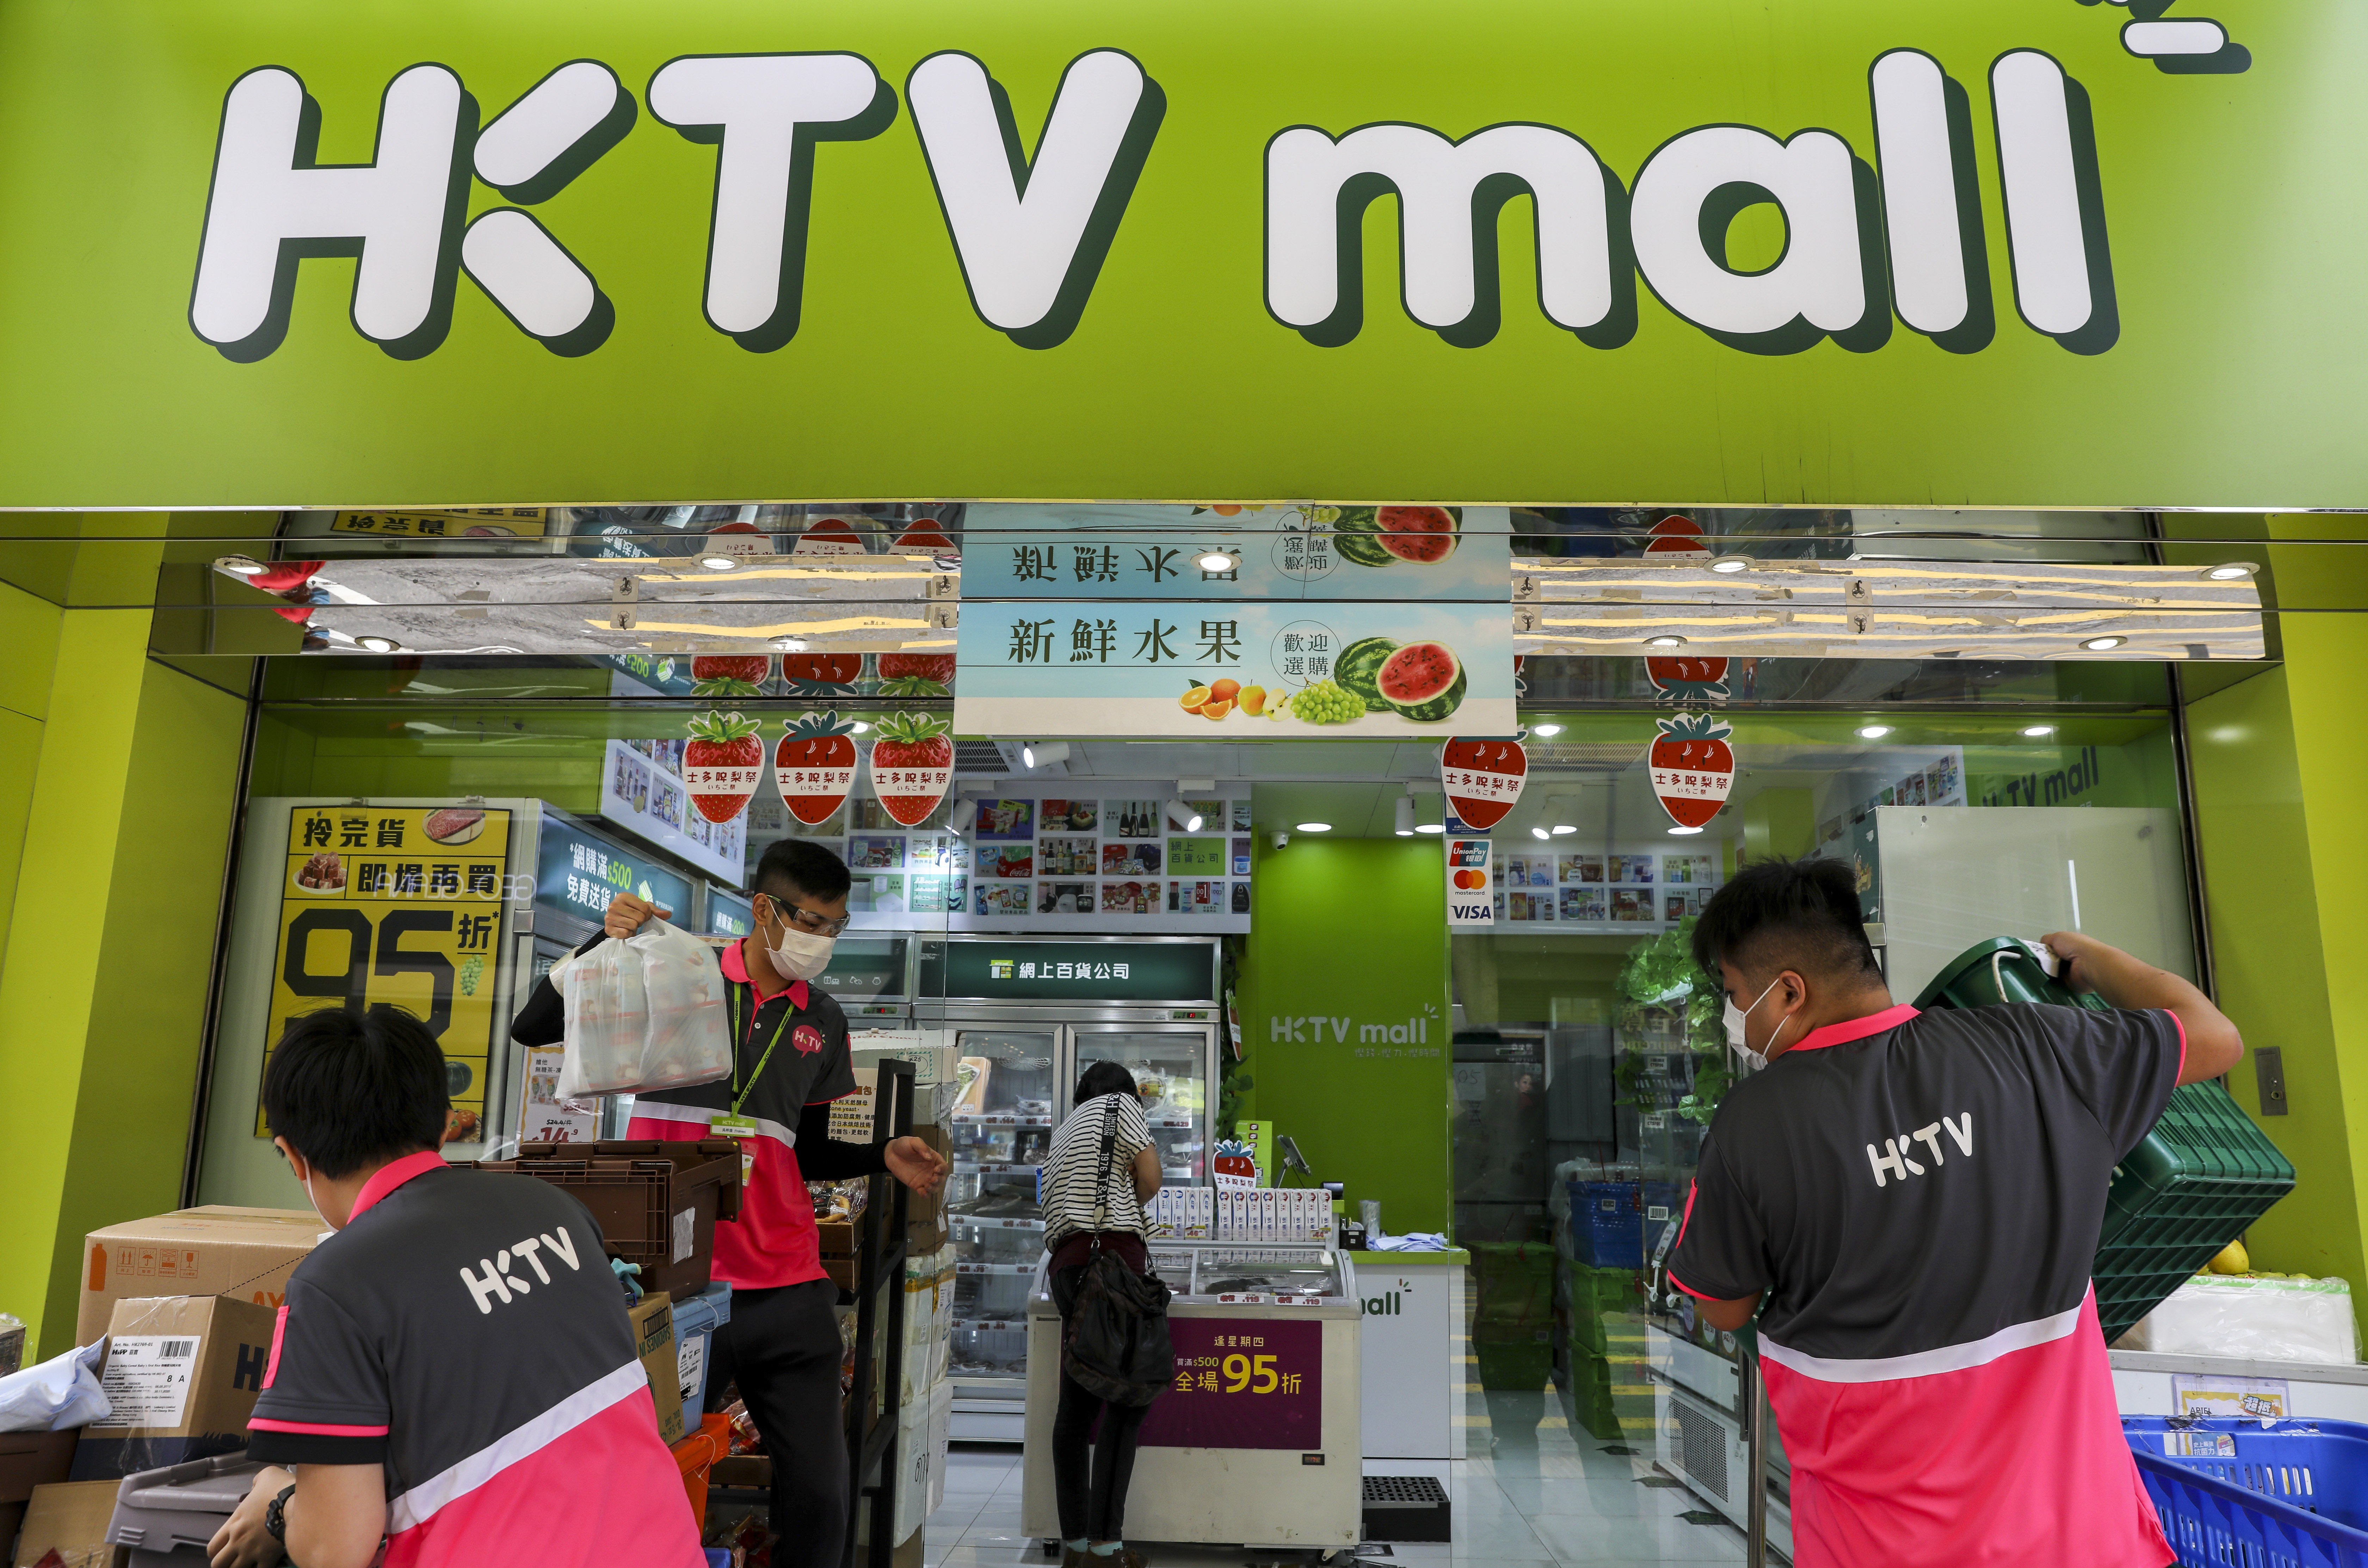 Online orders through HKTV Mall have been buoyed by people staying home during the Covid-19 crisis. Photo: K. Y. Cheng